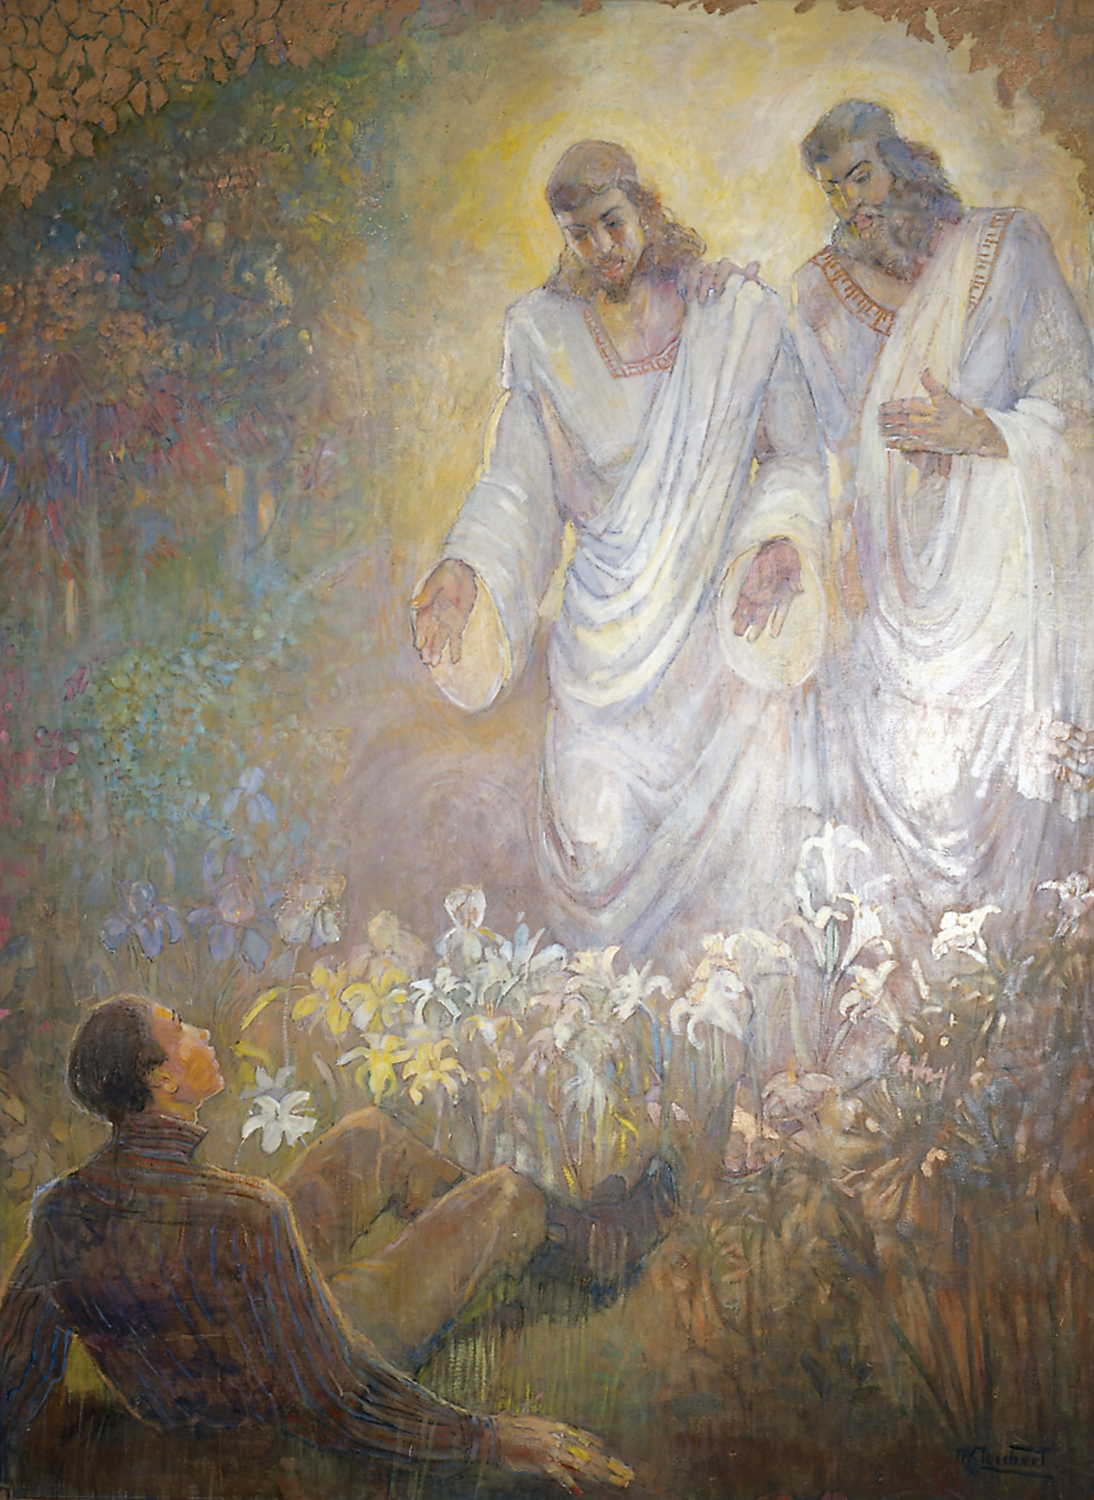 A painting of the First Vision.